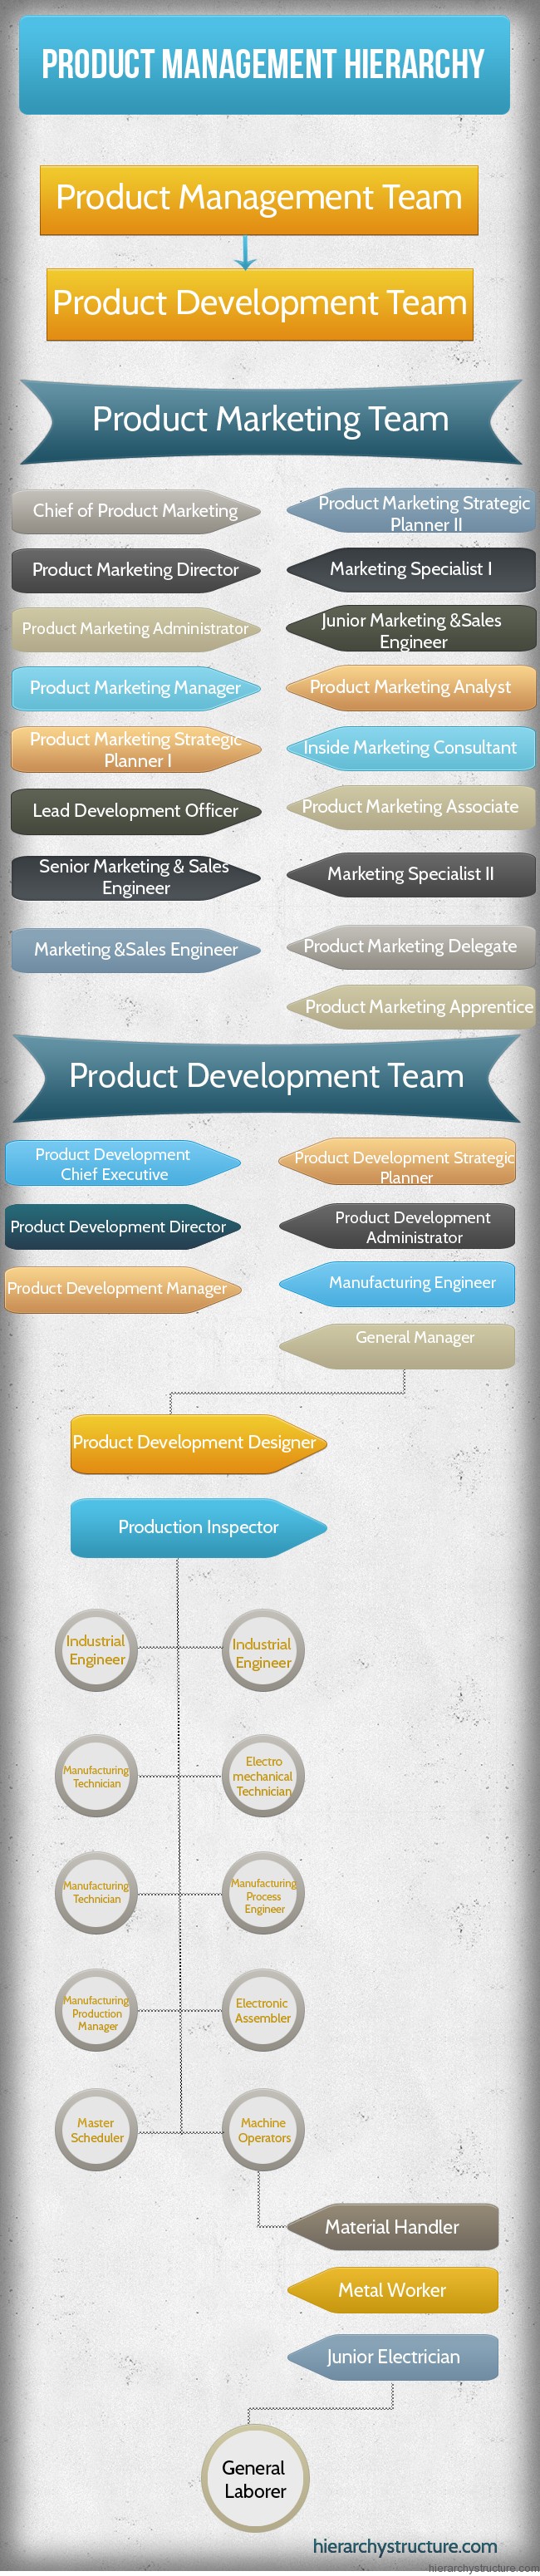 Product Management Hierarchy